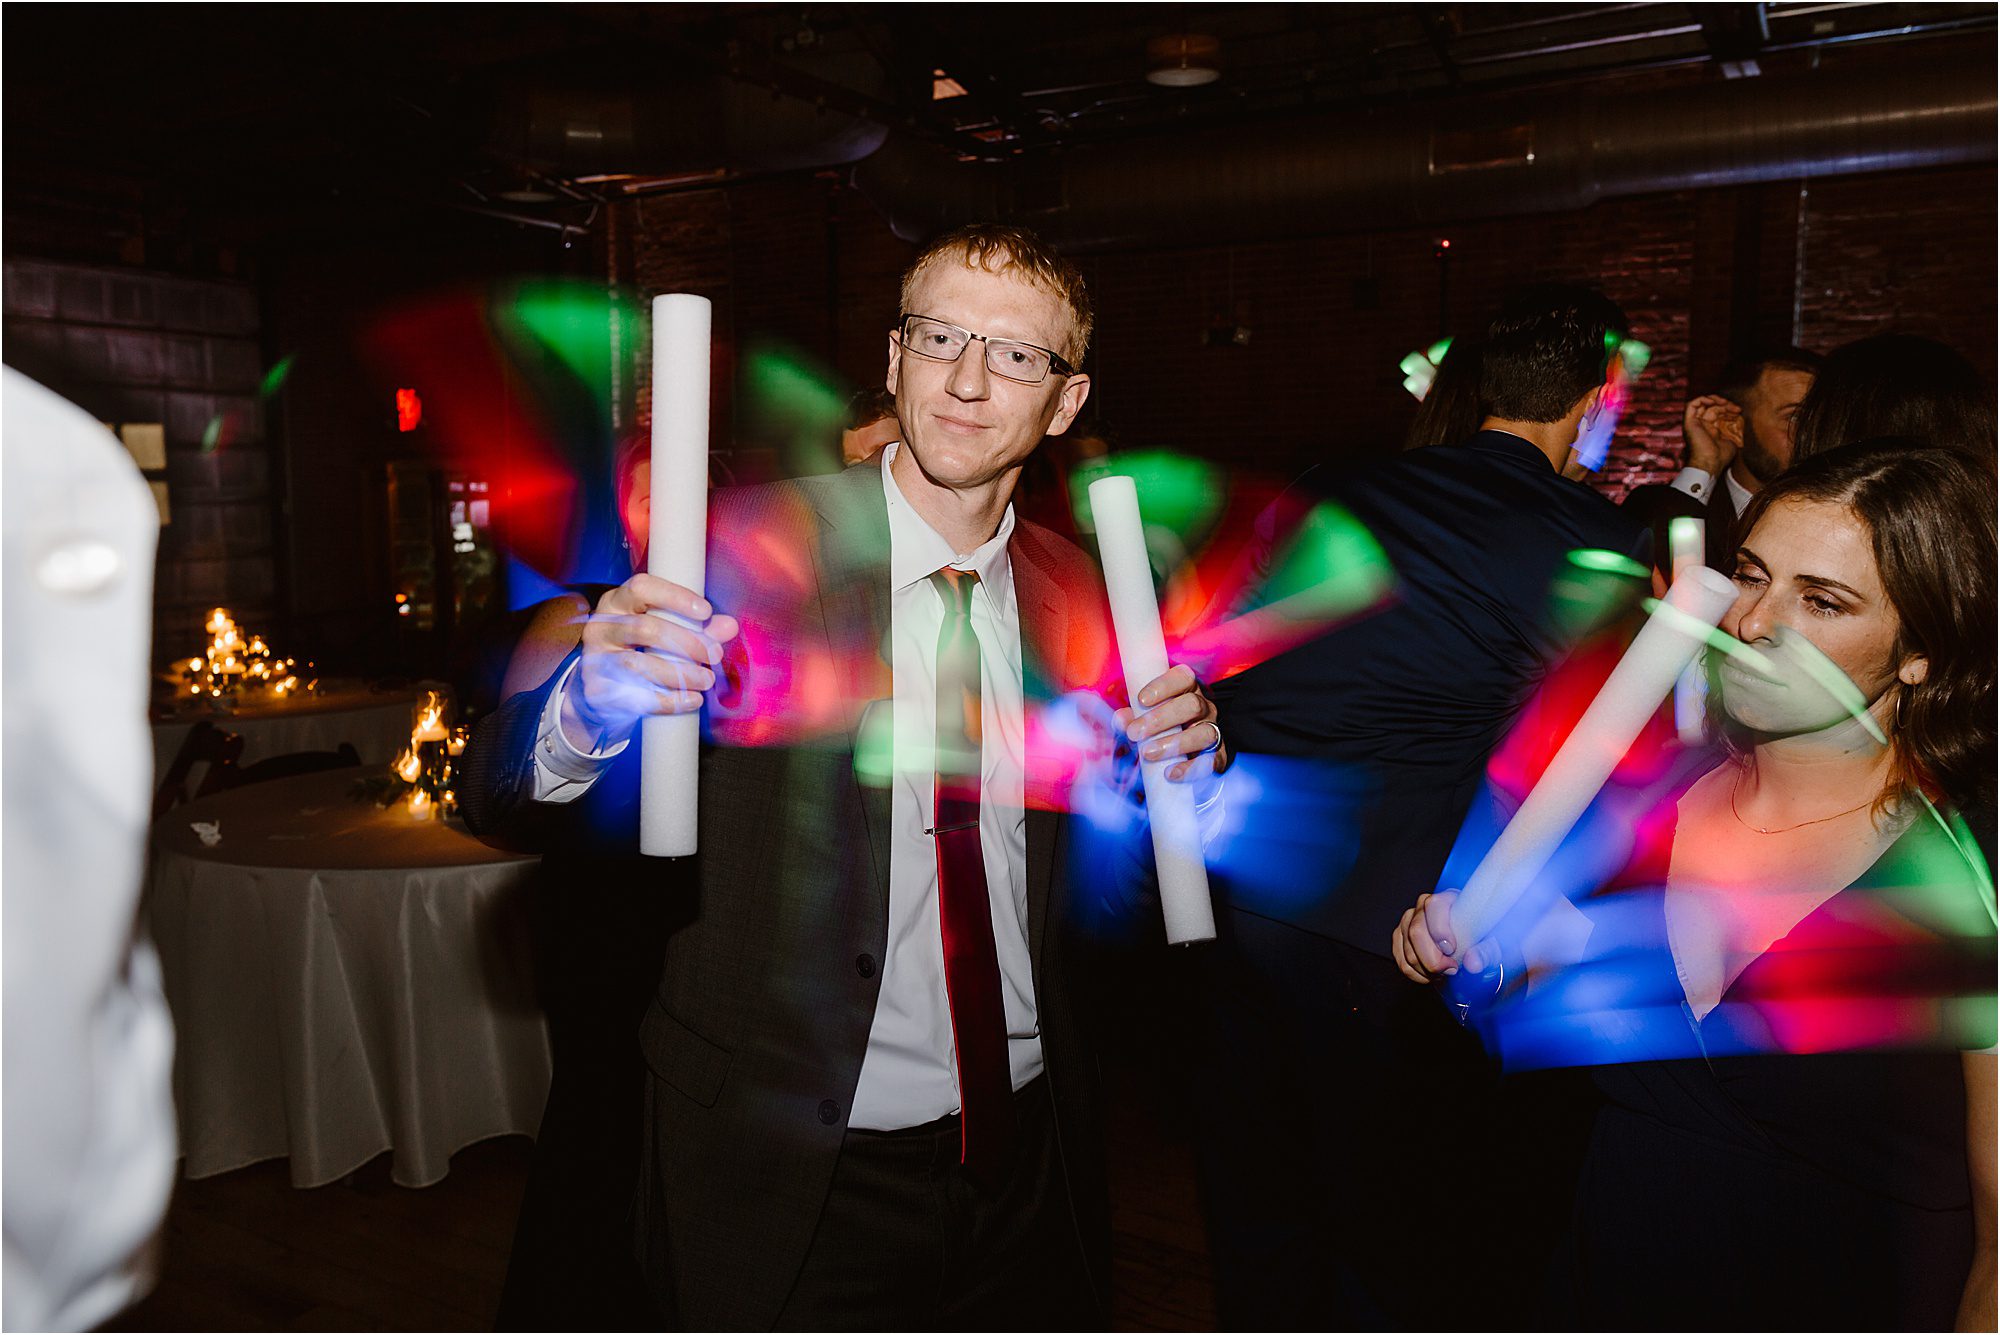 glow stick photos at wedding reception with slow drag and flash